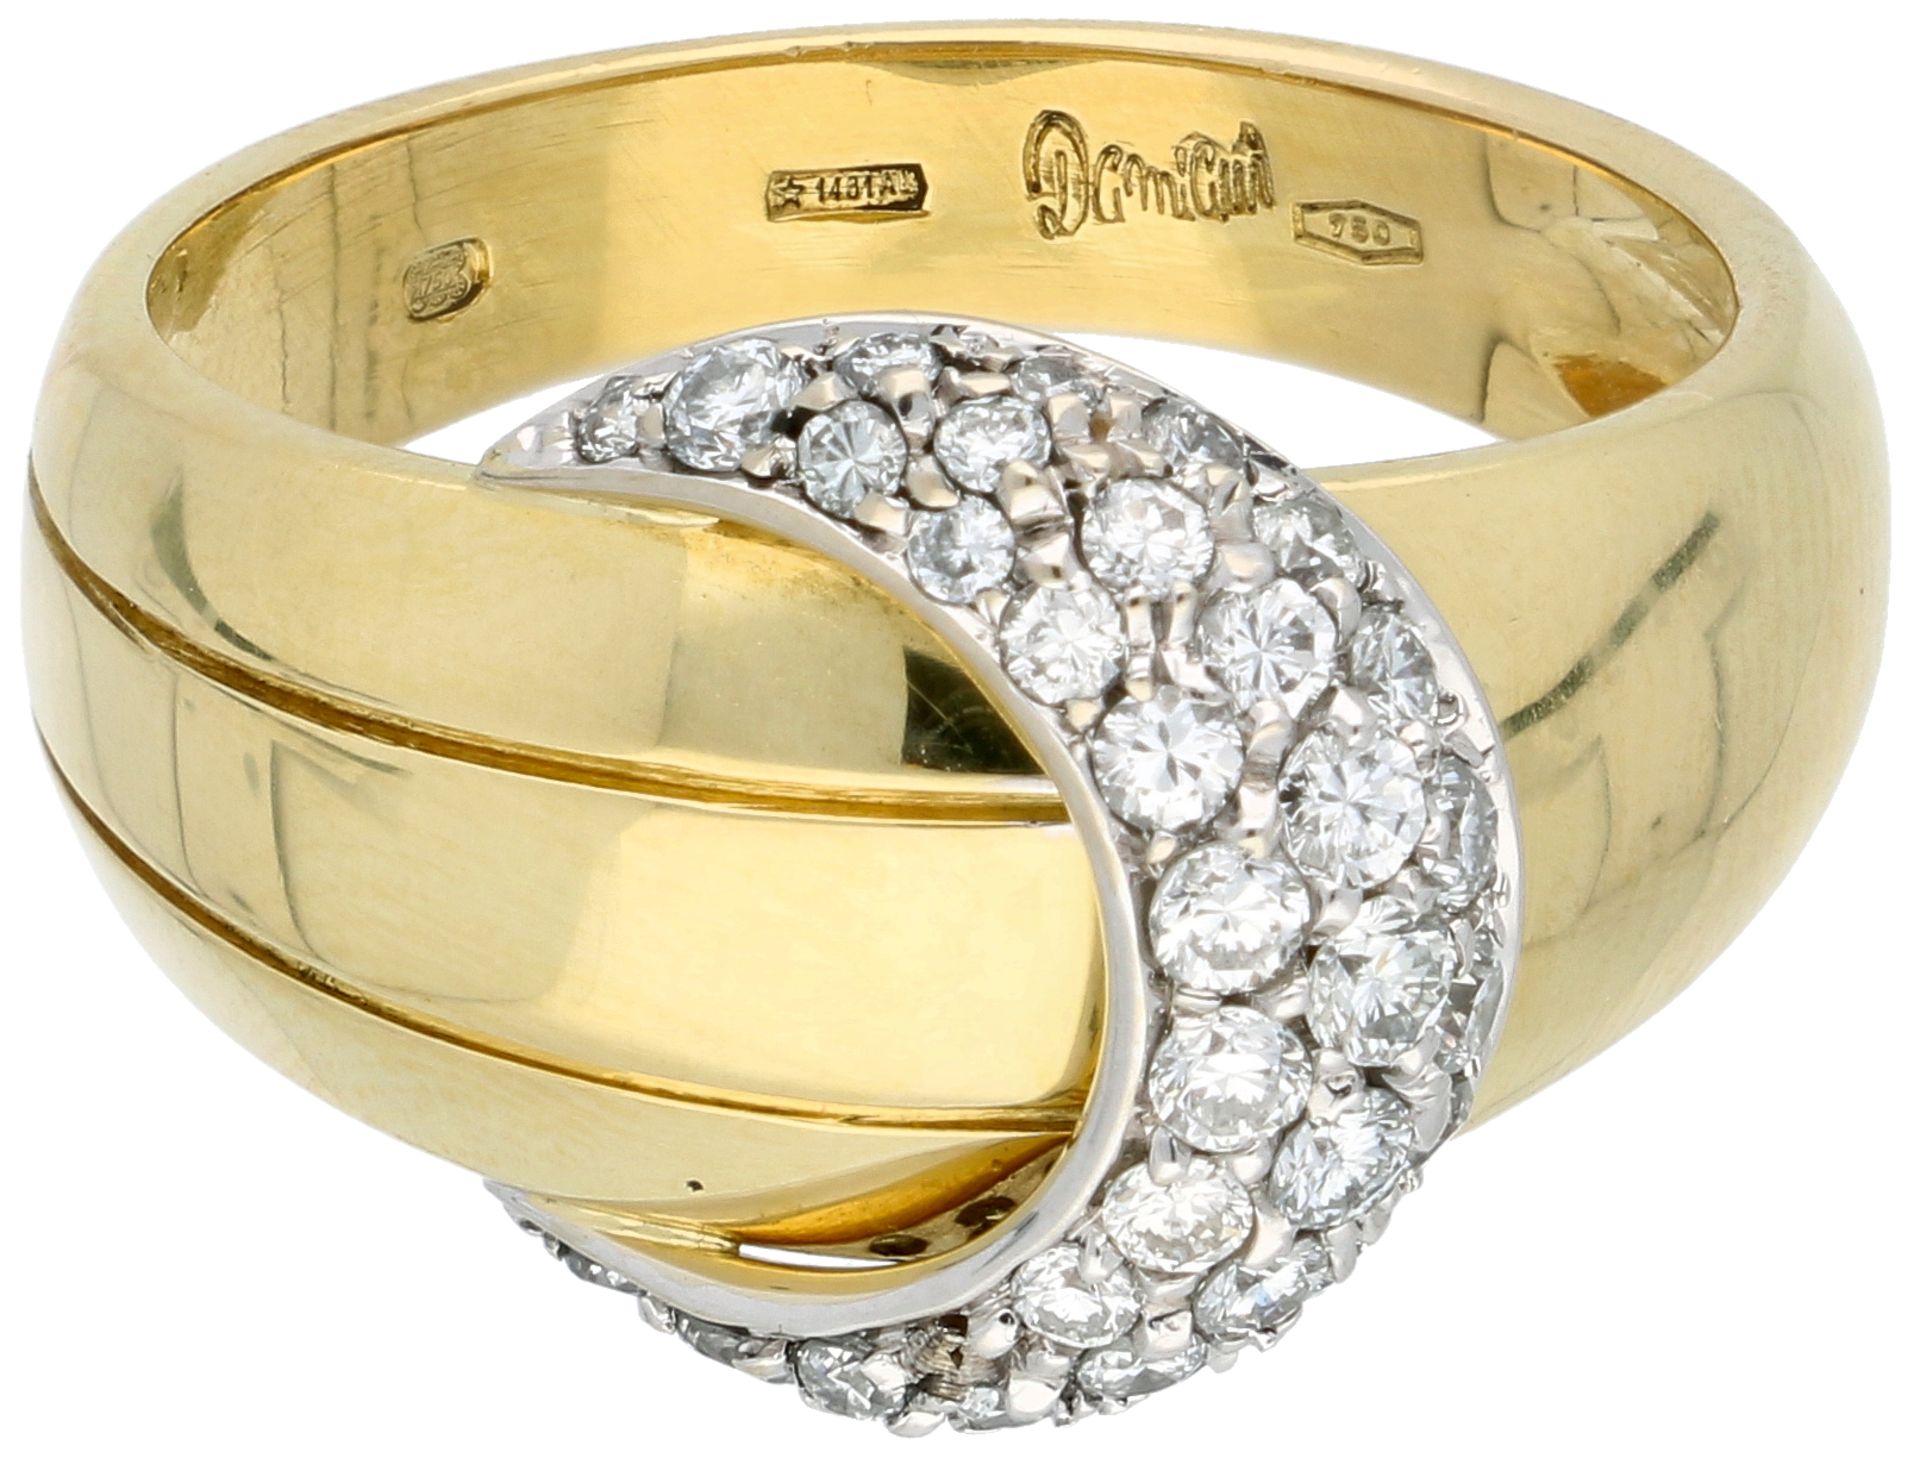 Damiani 18K yellow gold half moon ring set with approx. 0.46 ct diamond. - Image 3 of 4